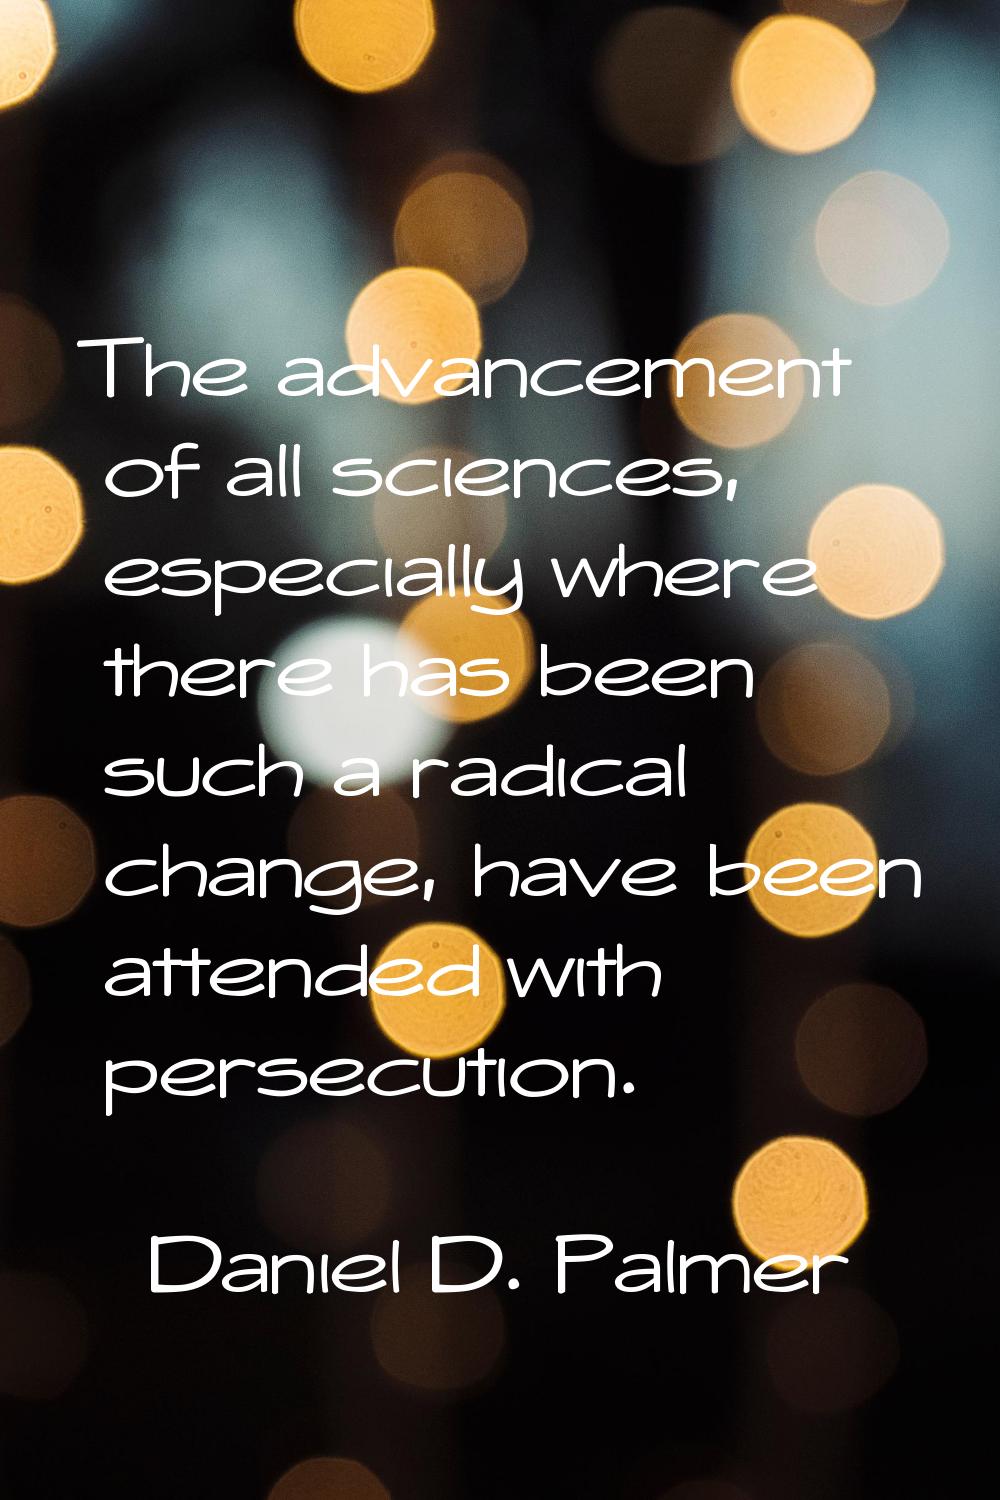 The advancement of all sciences, especially where there has been such a radical change, have been a